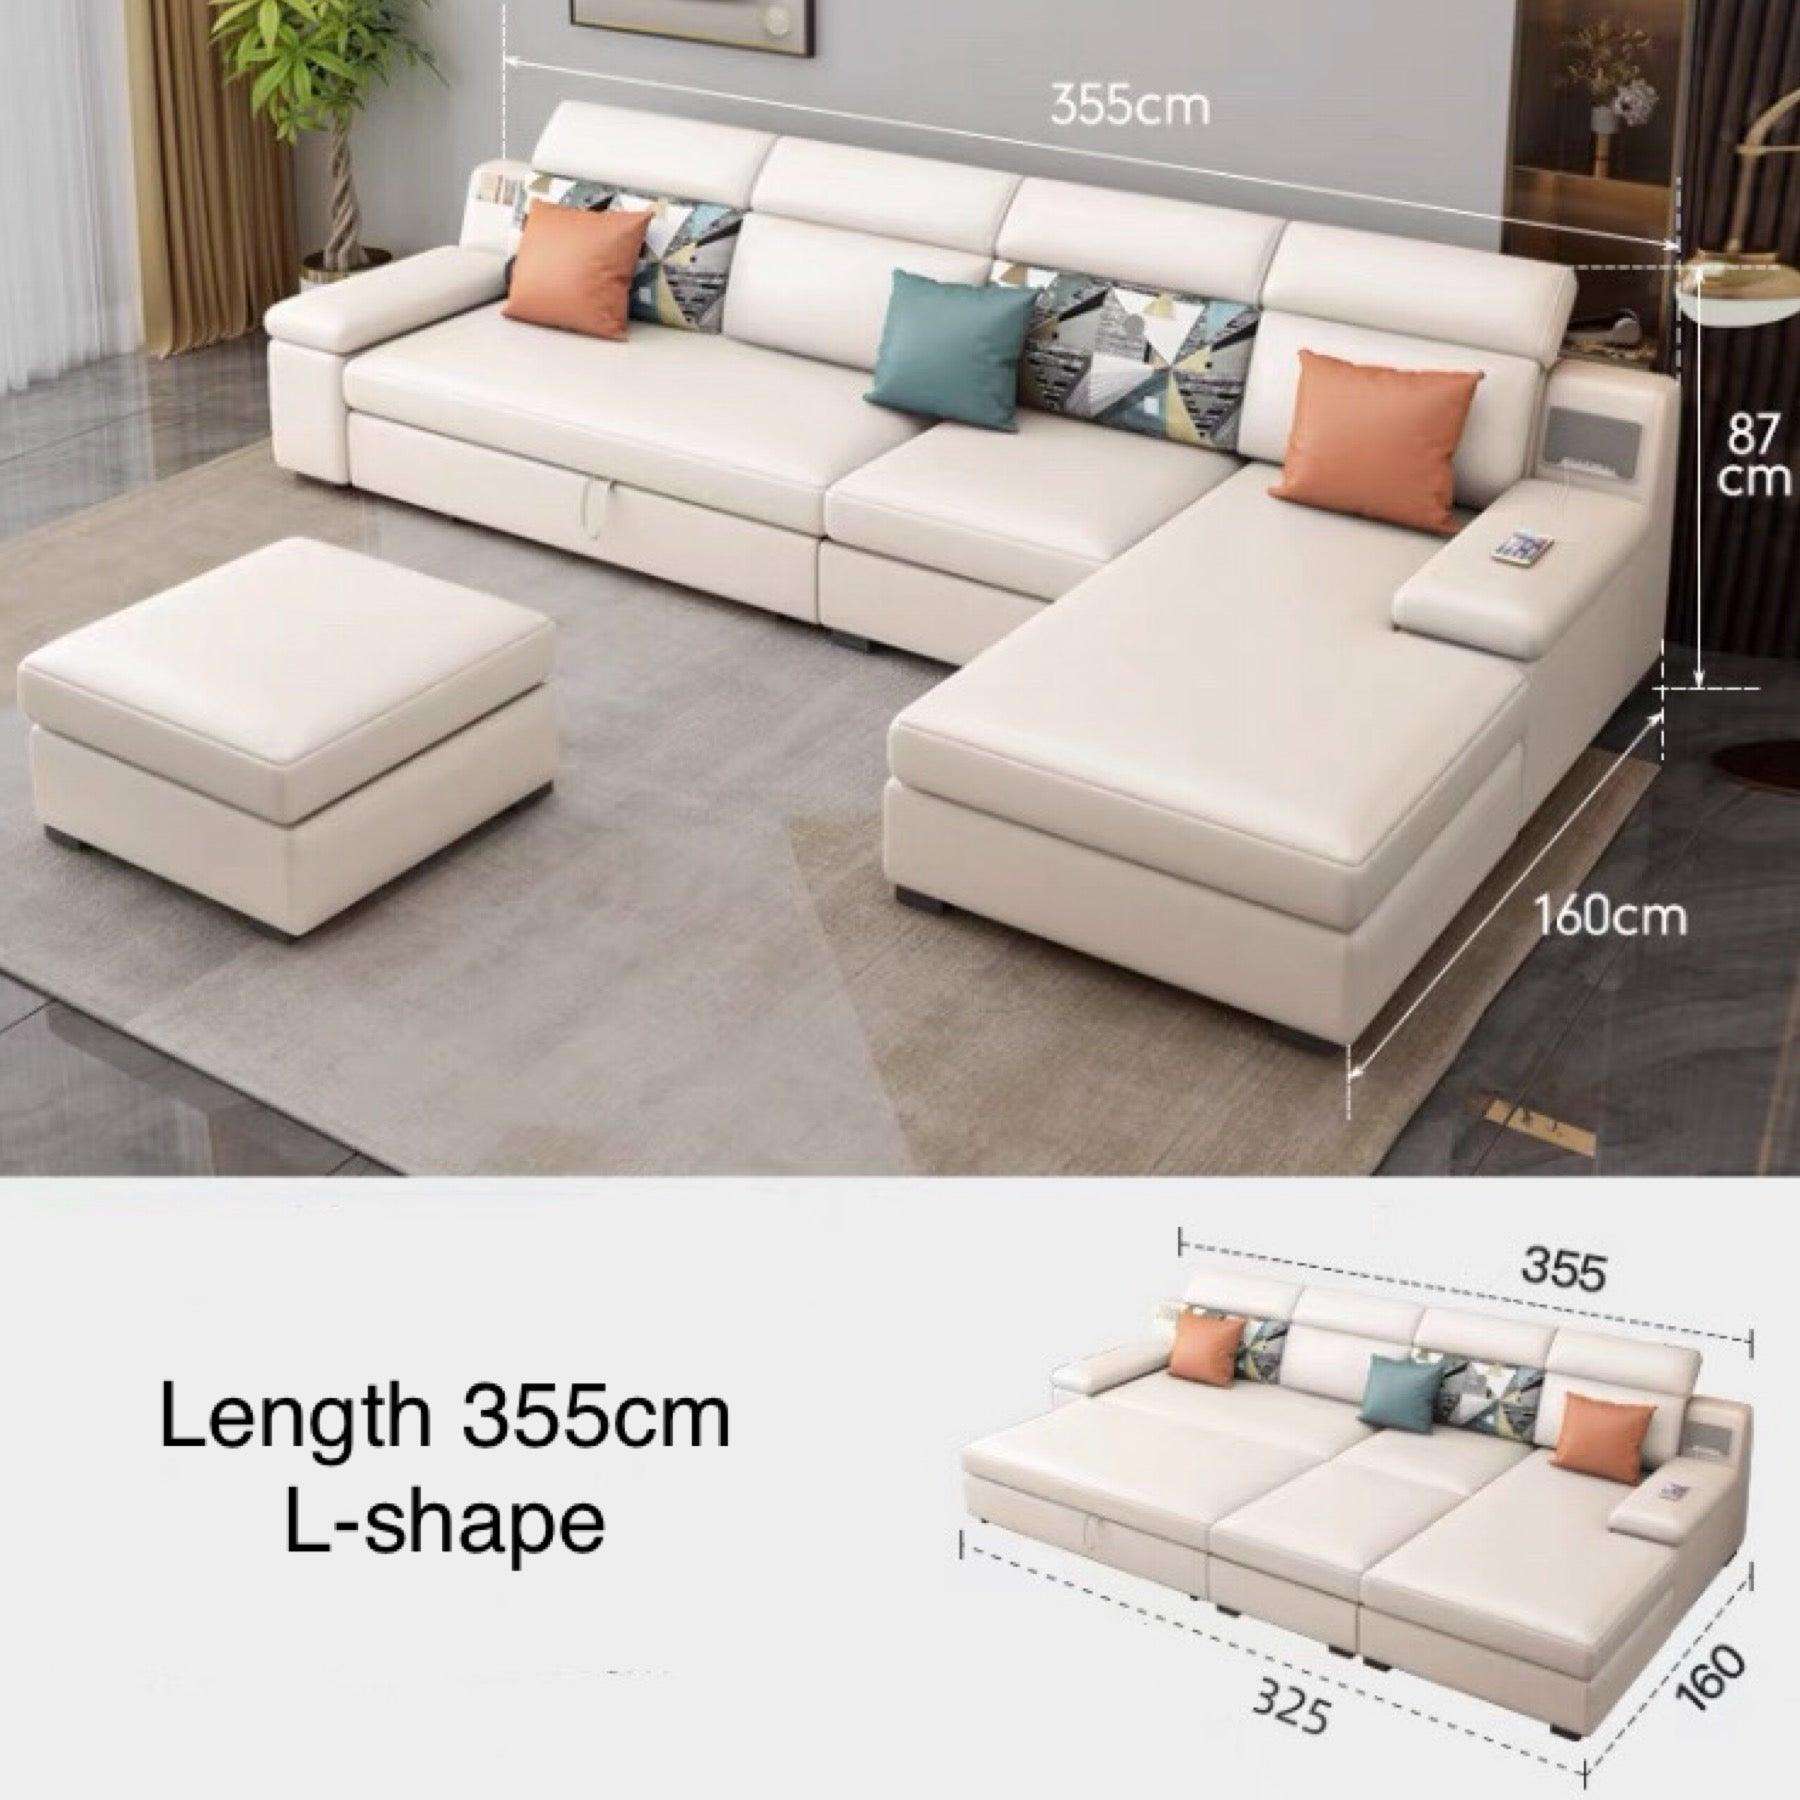 home-atelier-f31a Leather-Aire / Length 355cm/ L-shape / White Allson Sectional Sofa Bed